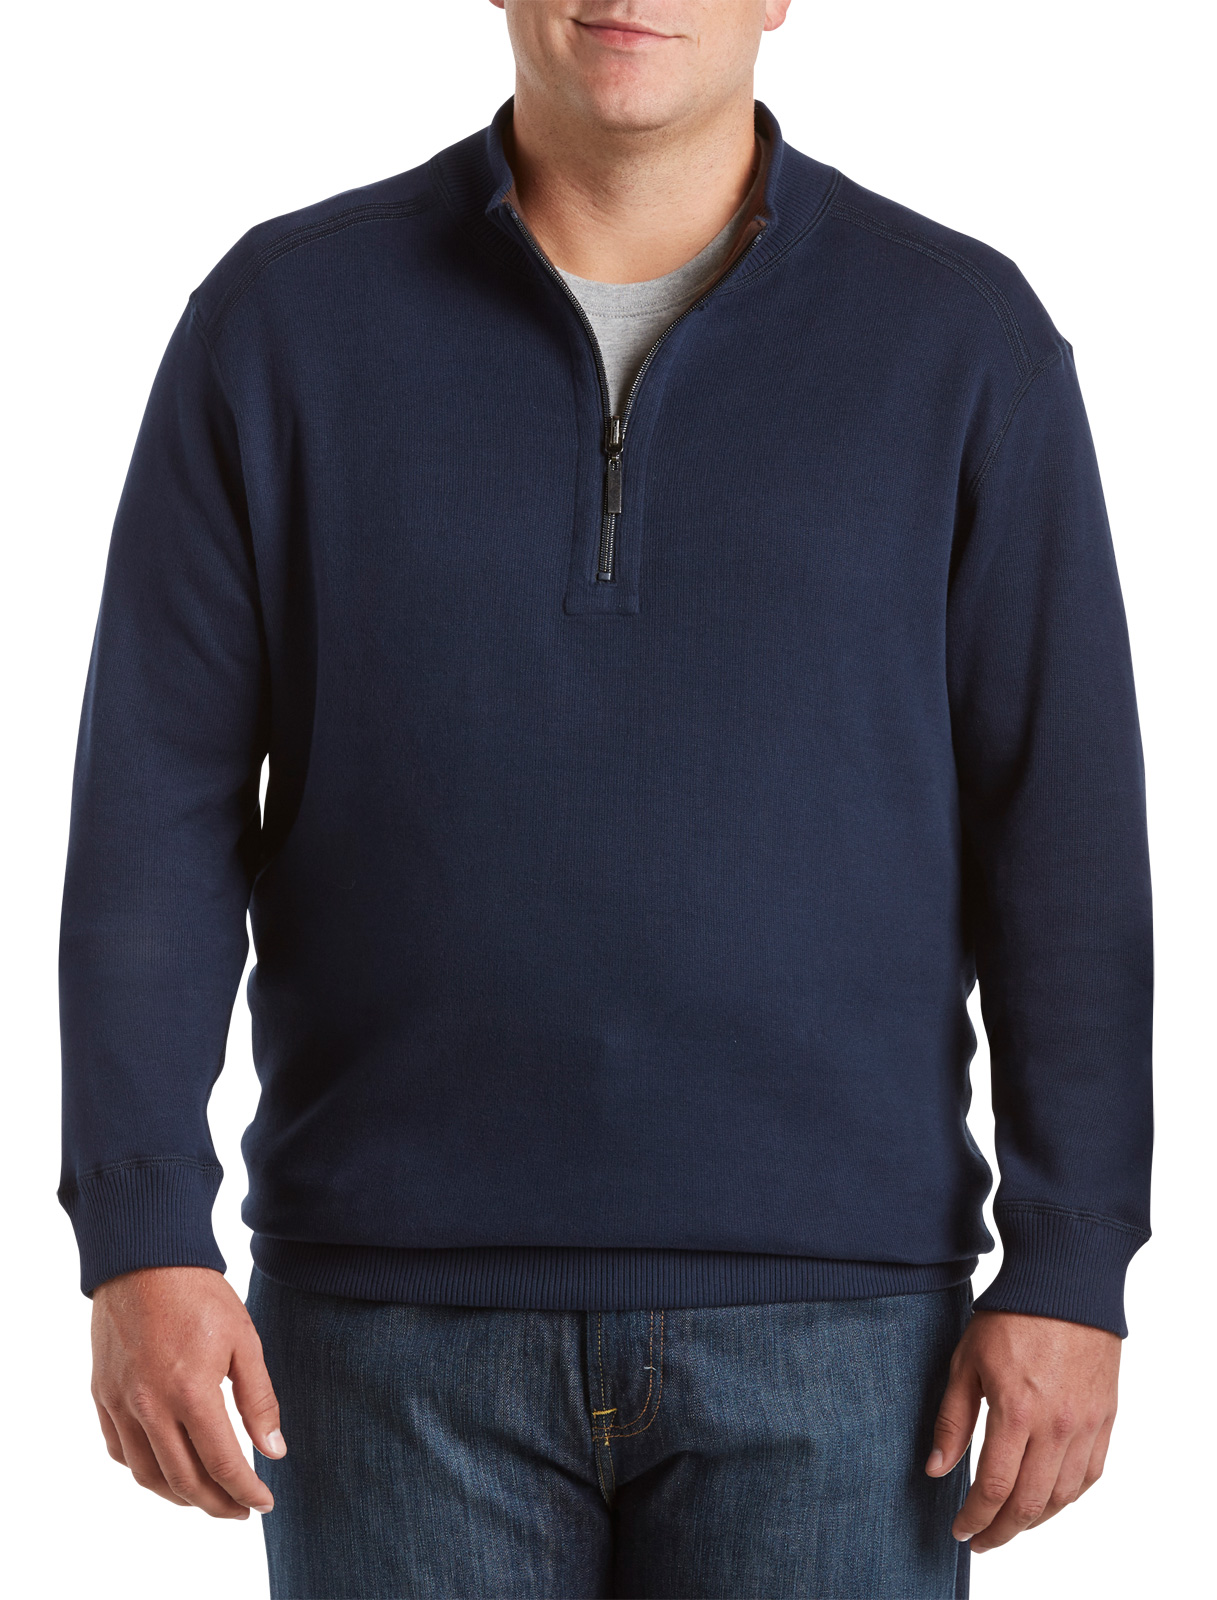 ROCHESTER Men's Big and Tall  Reversible Quarter-Zip Pullover